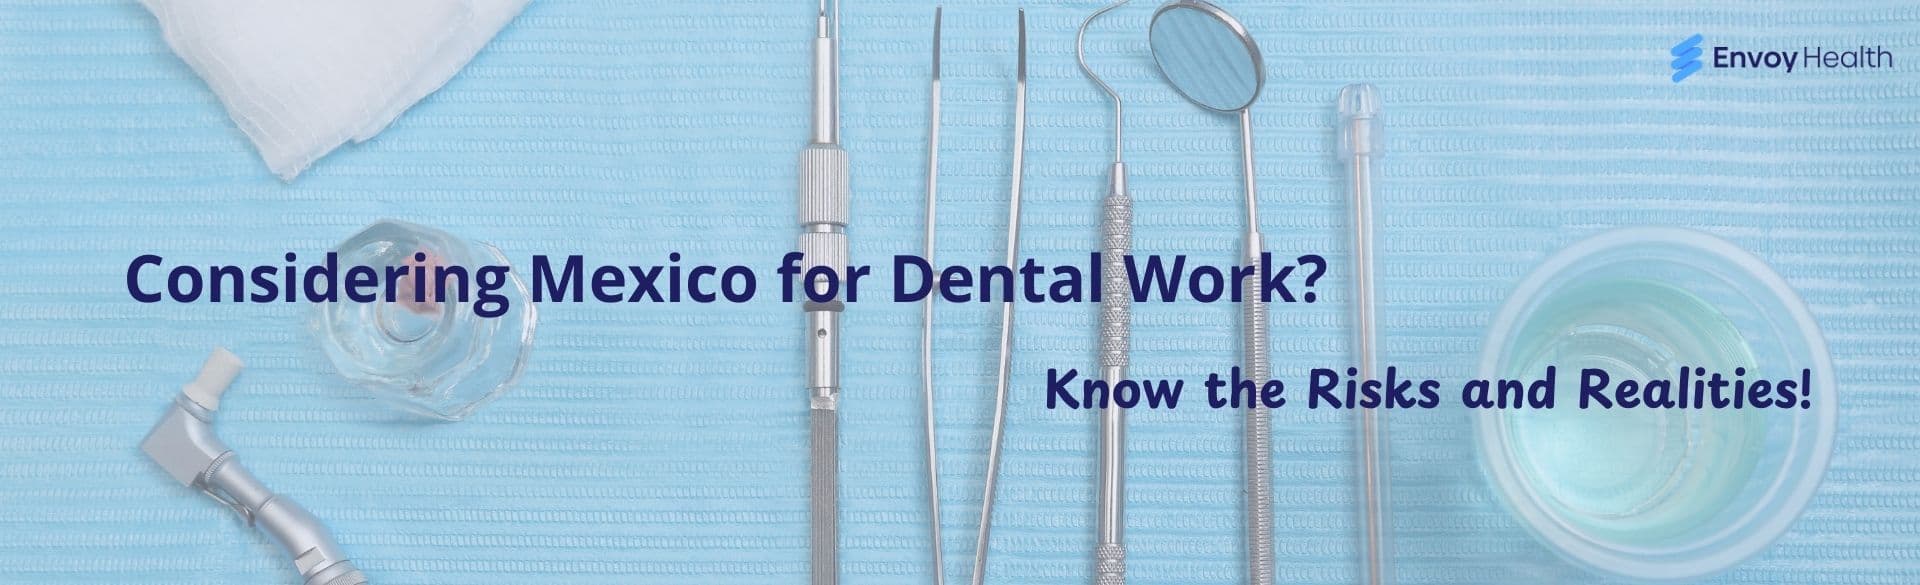 Considering Mexico for Dental Work? Know the Risks and Realities